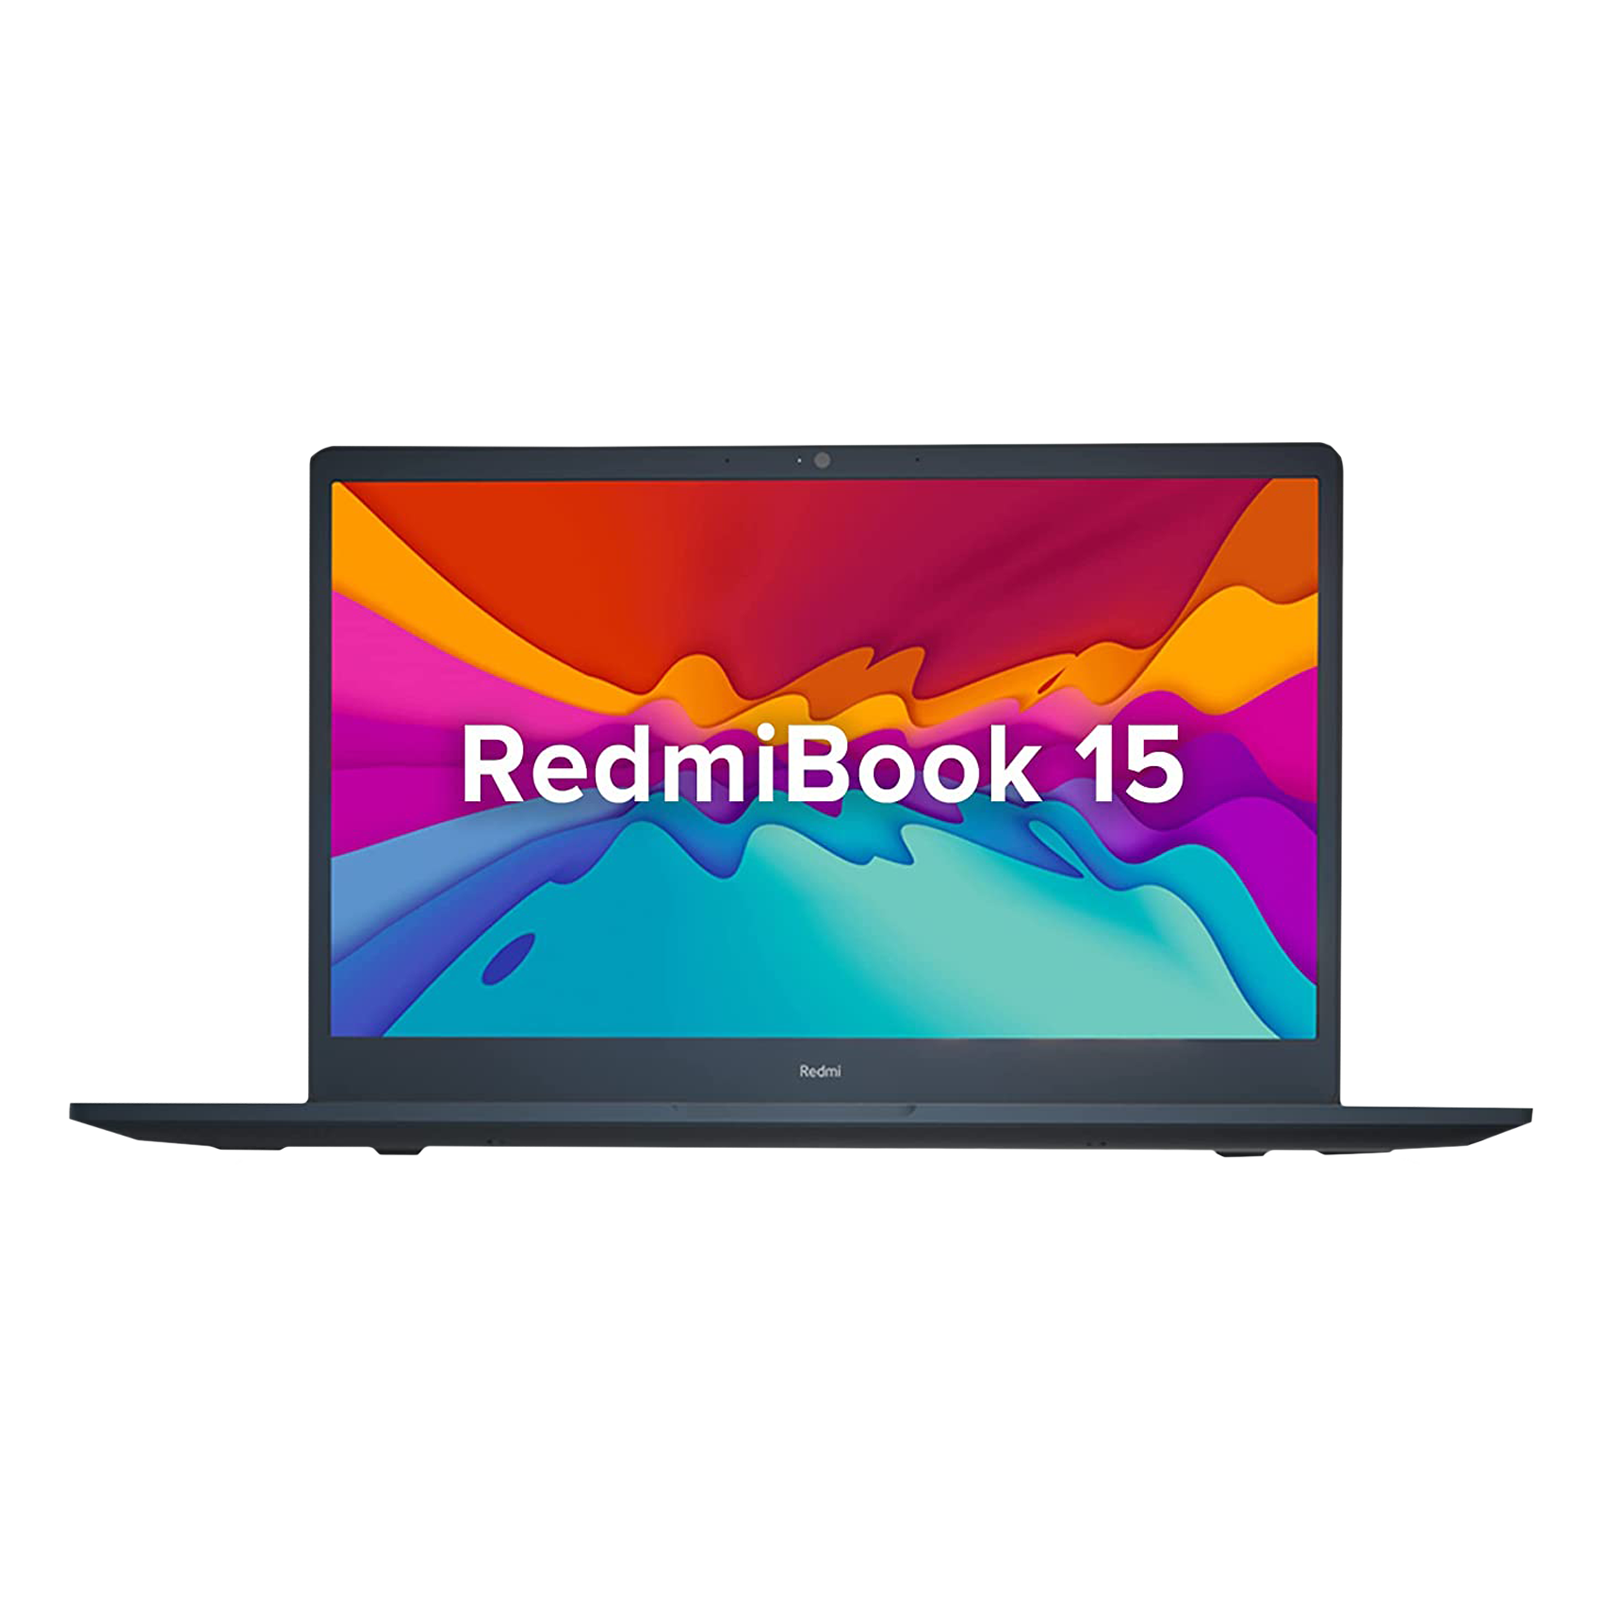 Redmi Book 15 e-Learning Edition Intel Core i3 11th Gen (15.6 inch, 8GB, 256GB, Windows 10, MS Office 2019, Intel UHD Graphics, FHD IPS Display, Charcoal Grey, JYU4433IN)_1